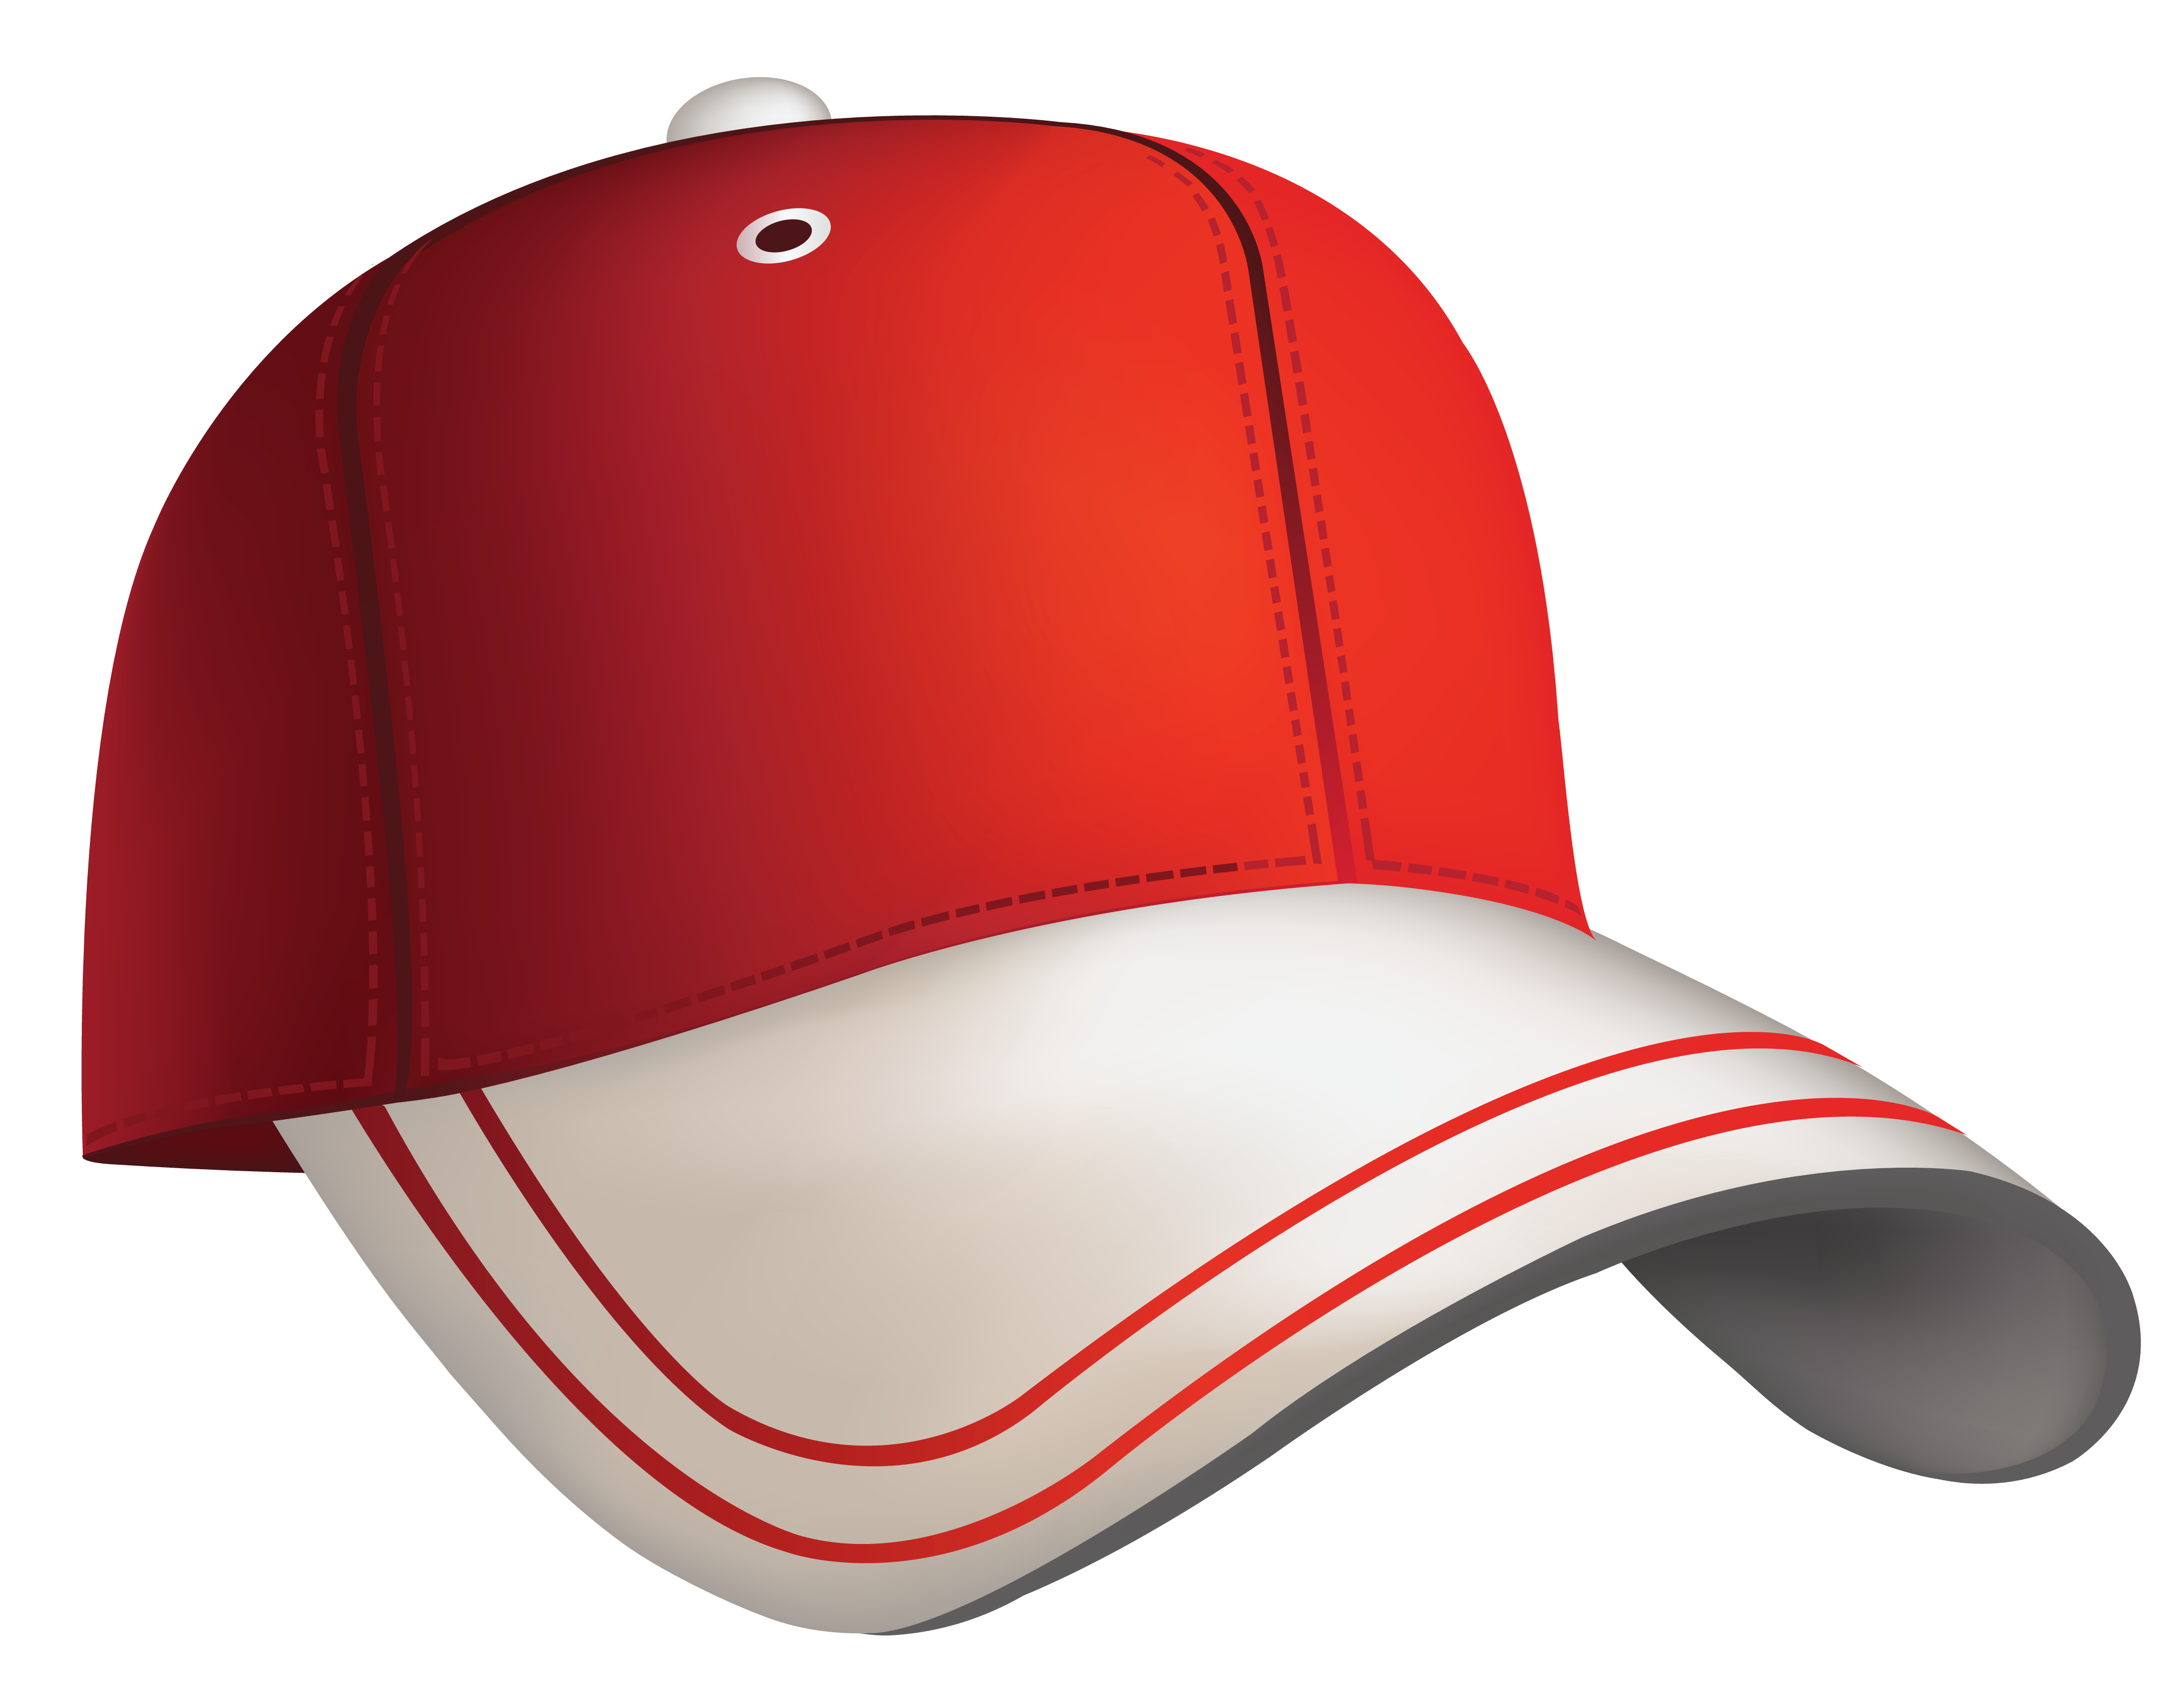 red hat clip art download - photo #47